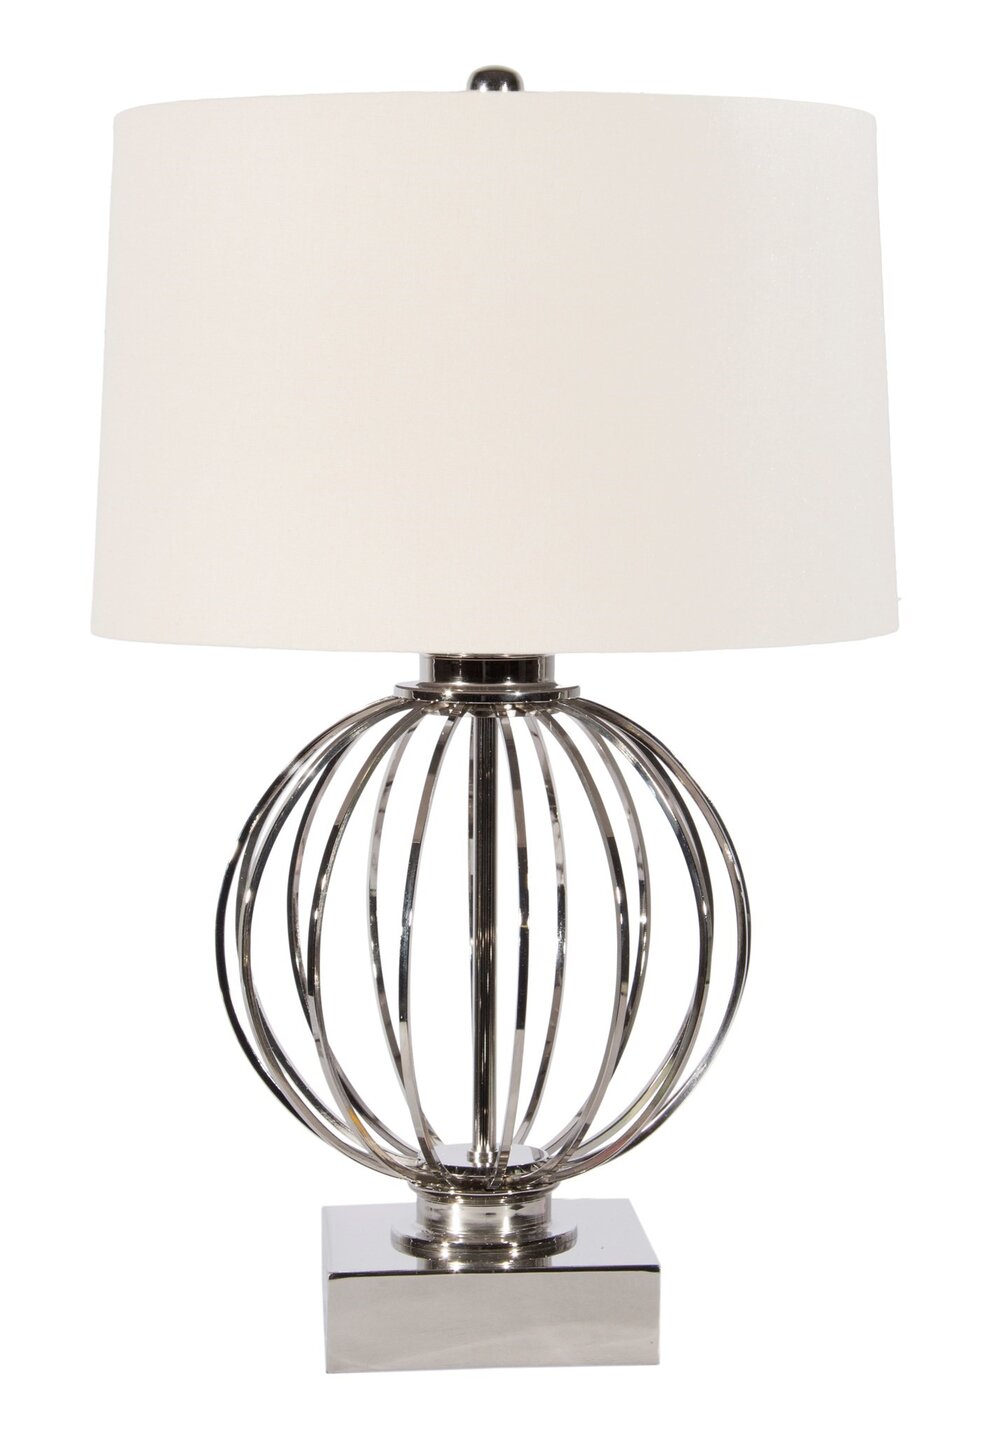 Mixing Lamps In Living Room House, How To Mix And Match Table Lamps